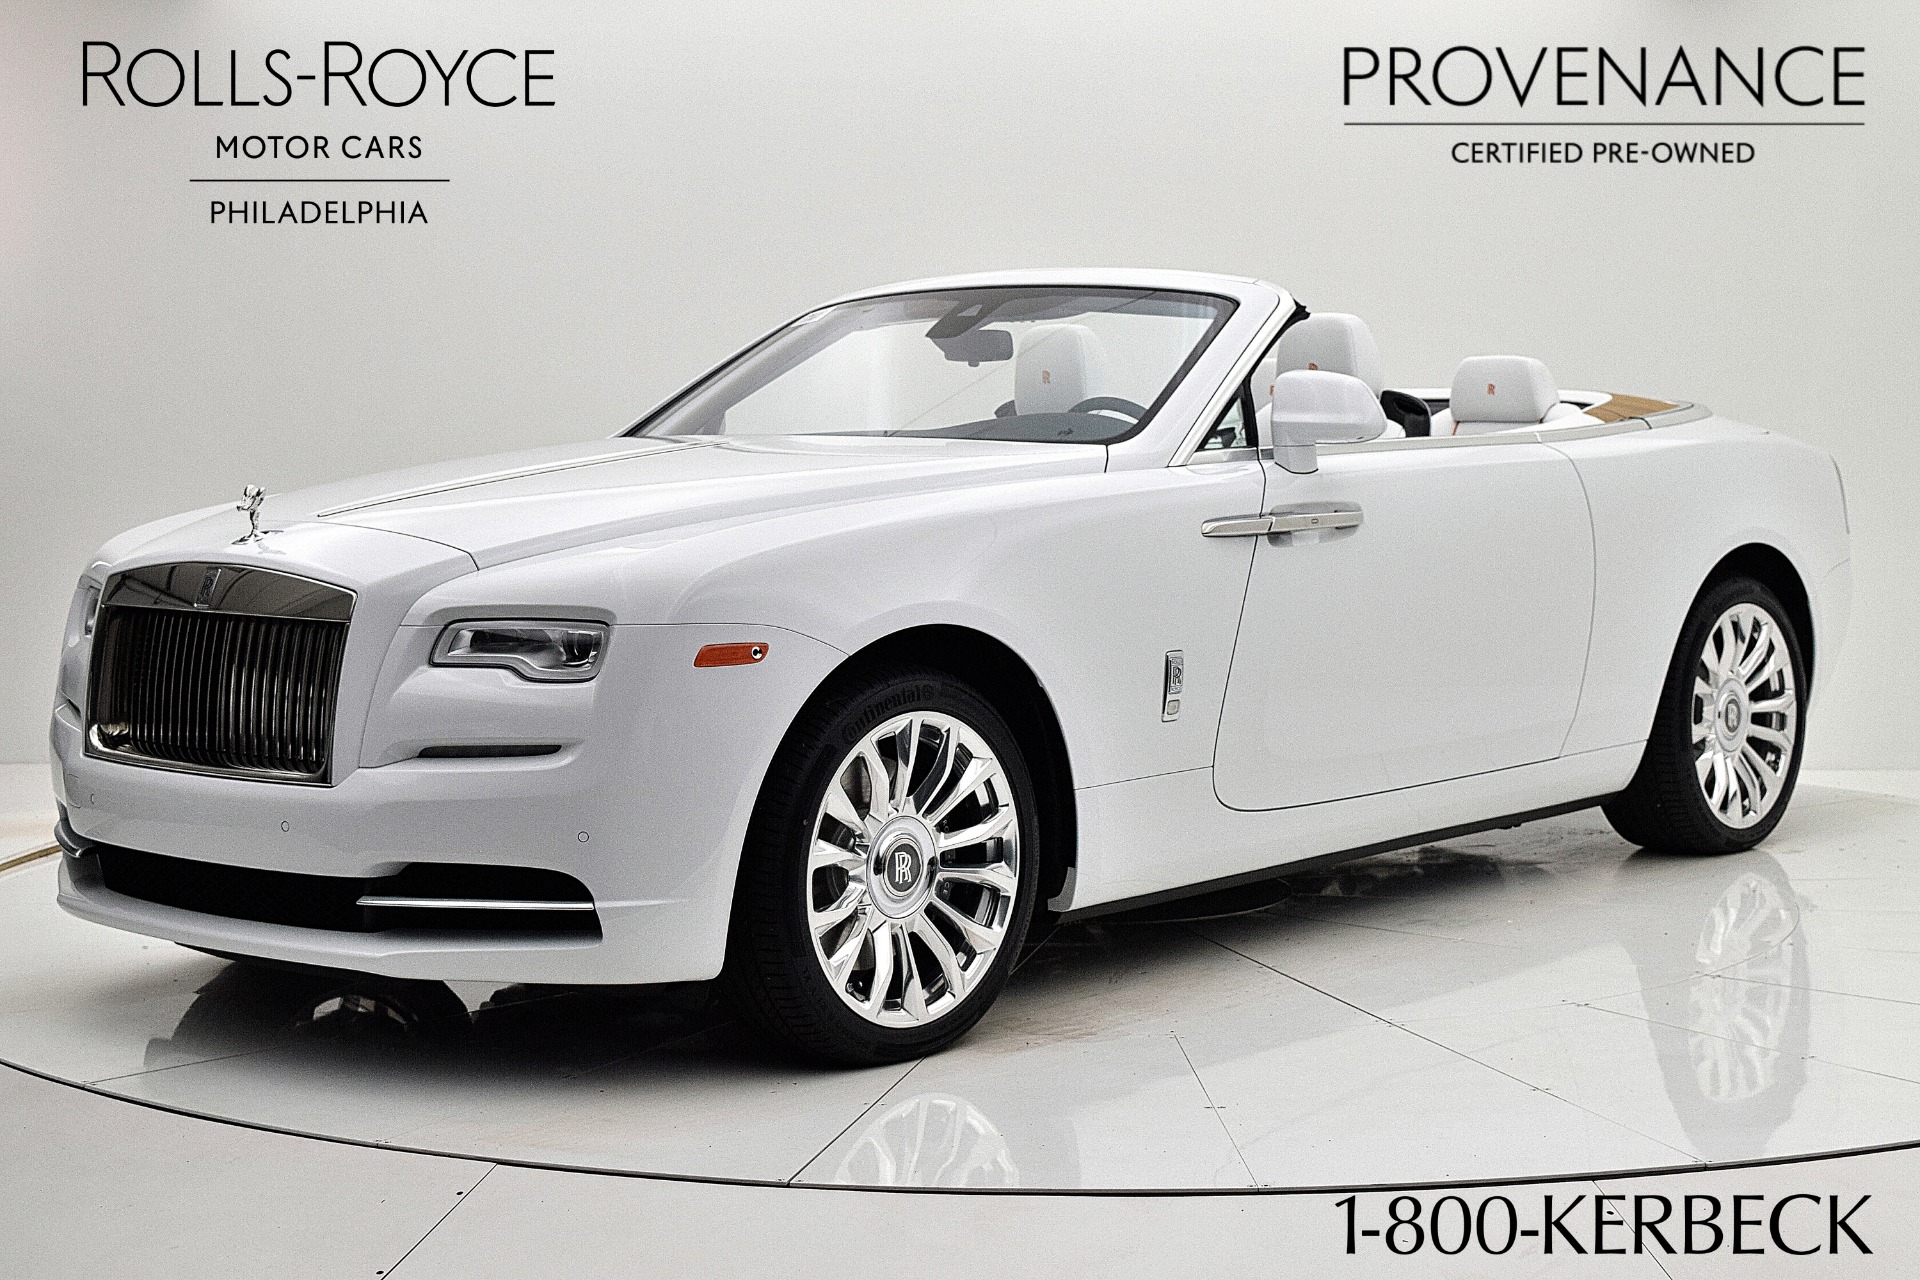 Used 2019 Rolls-Royce Dawn / LEASE OPTIONS AVAILABLE for sale $369,000 at Rolls-Royce Motor Cars Philadelphia in Palmyra NJ 08065 2